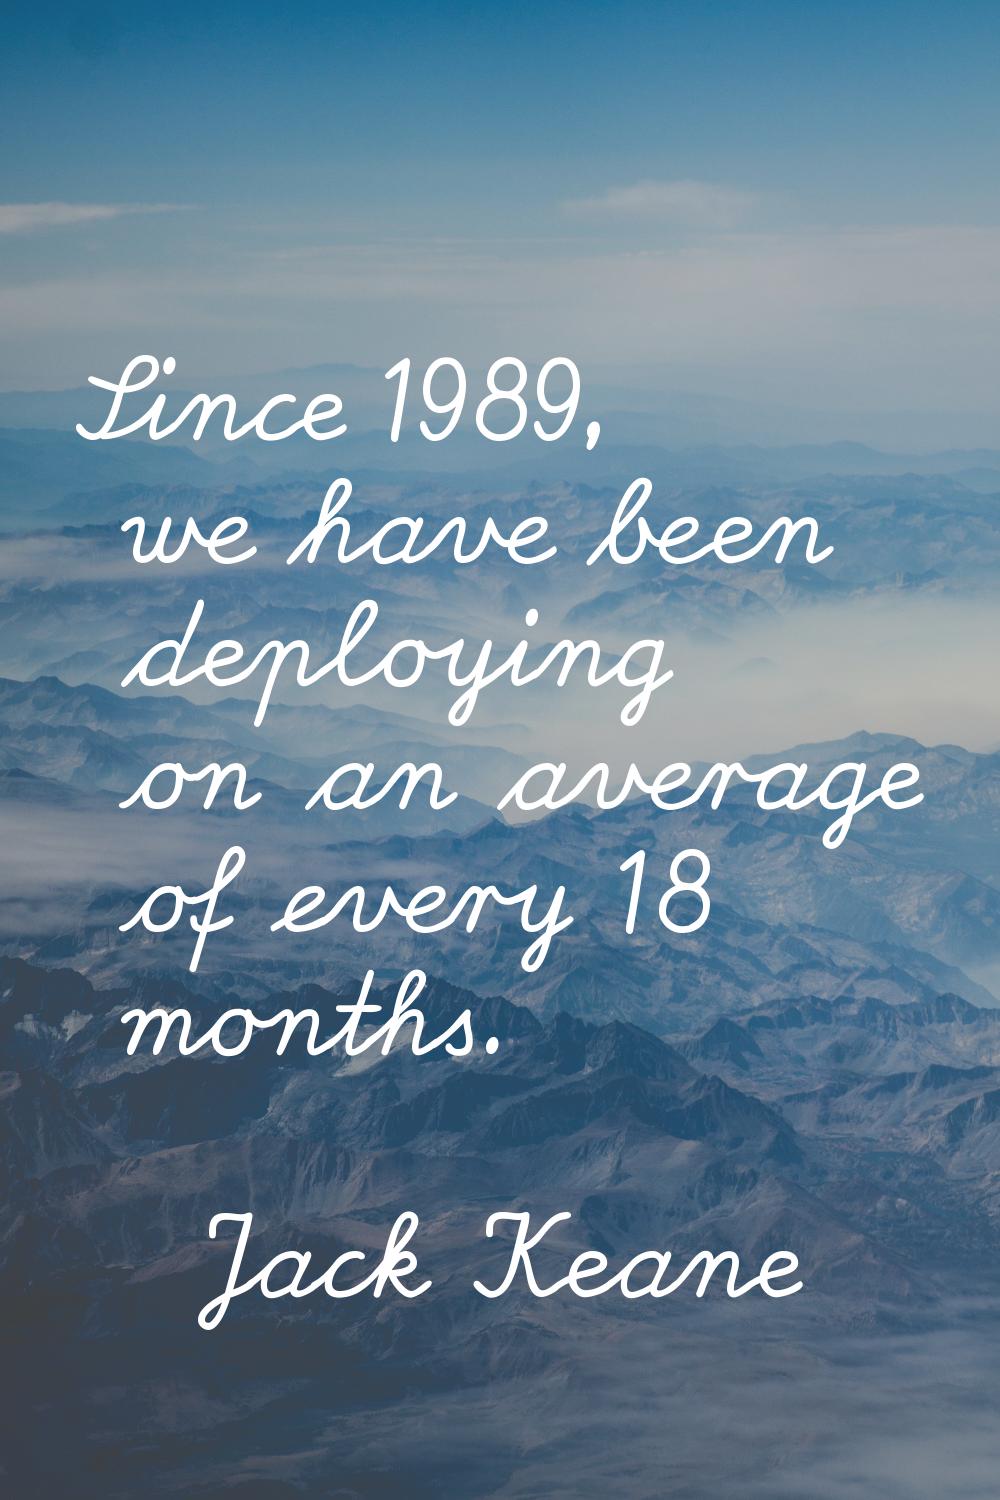 Since 1989, we have been deploying on an average of every 18 months.